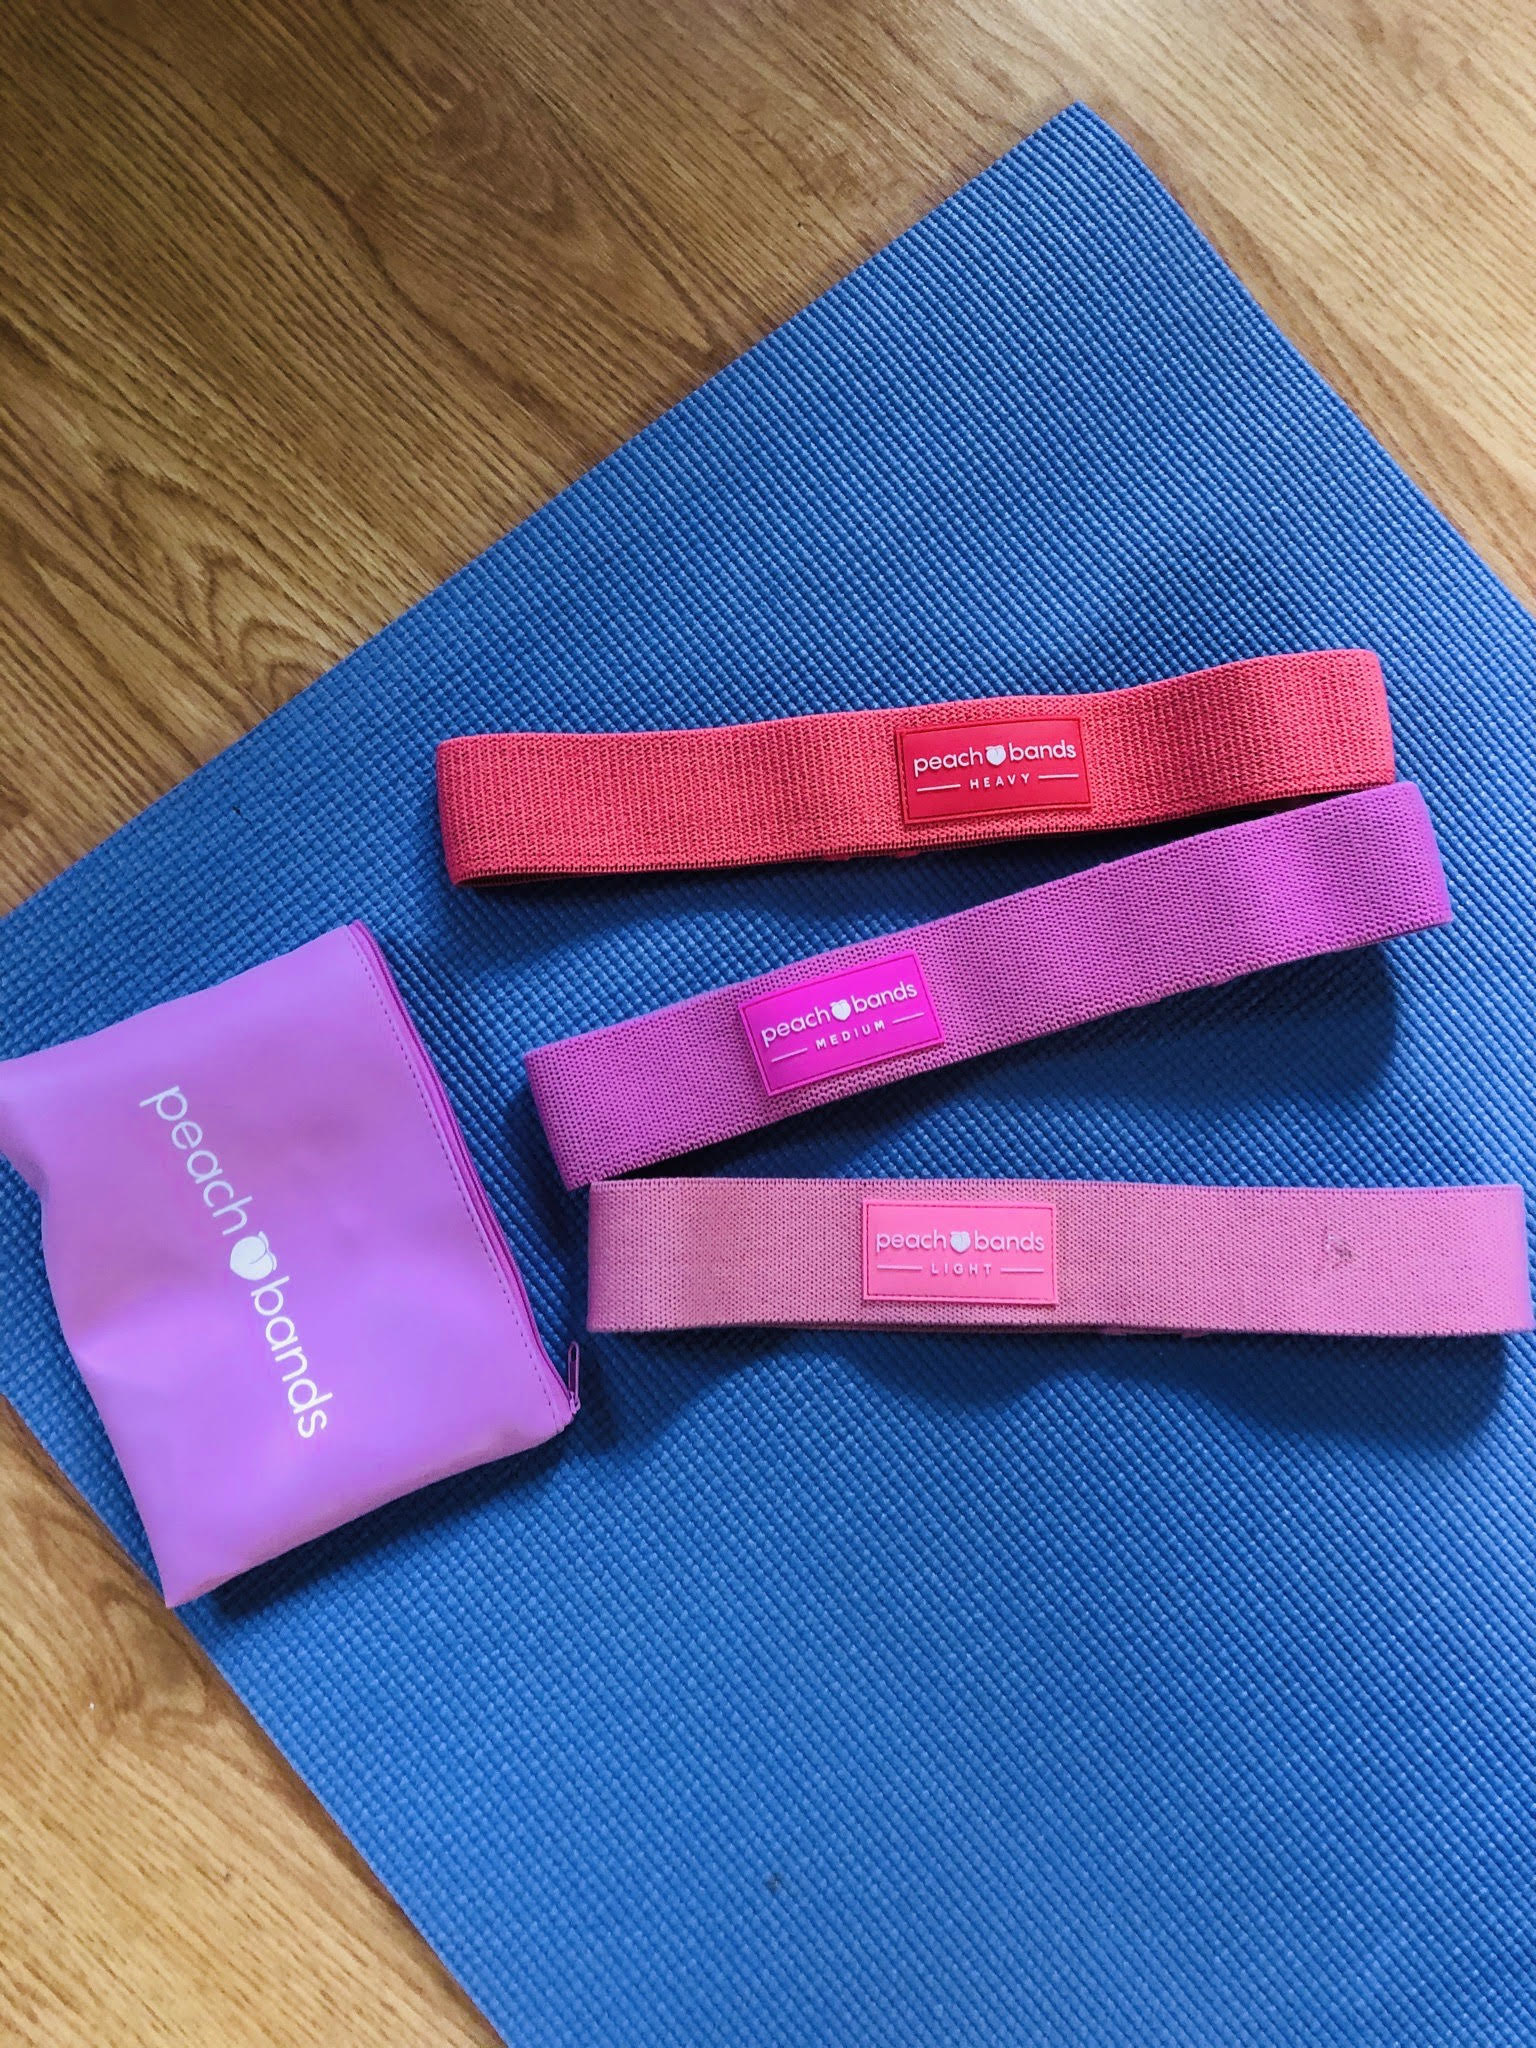 The set of three peach bands lying on a workout mat